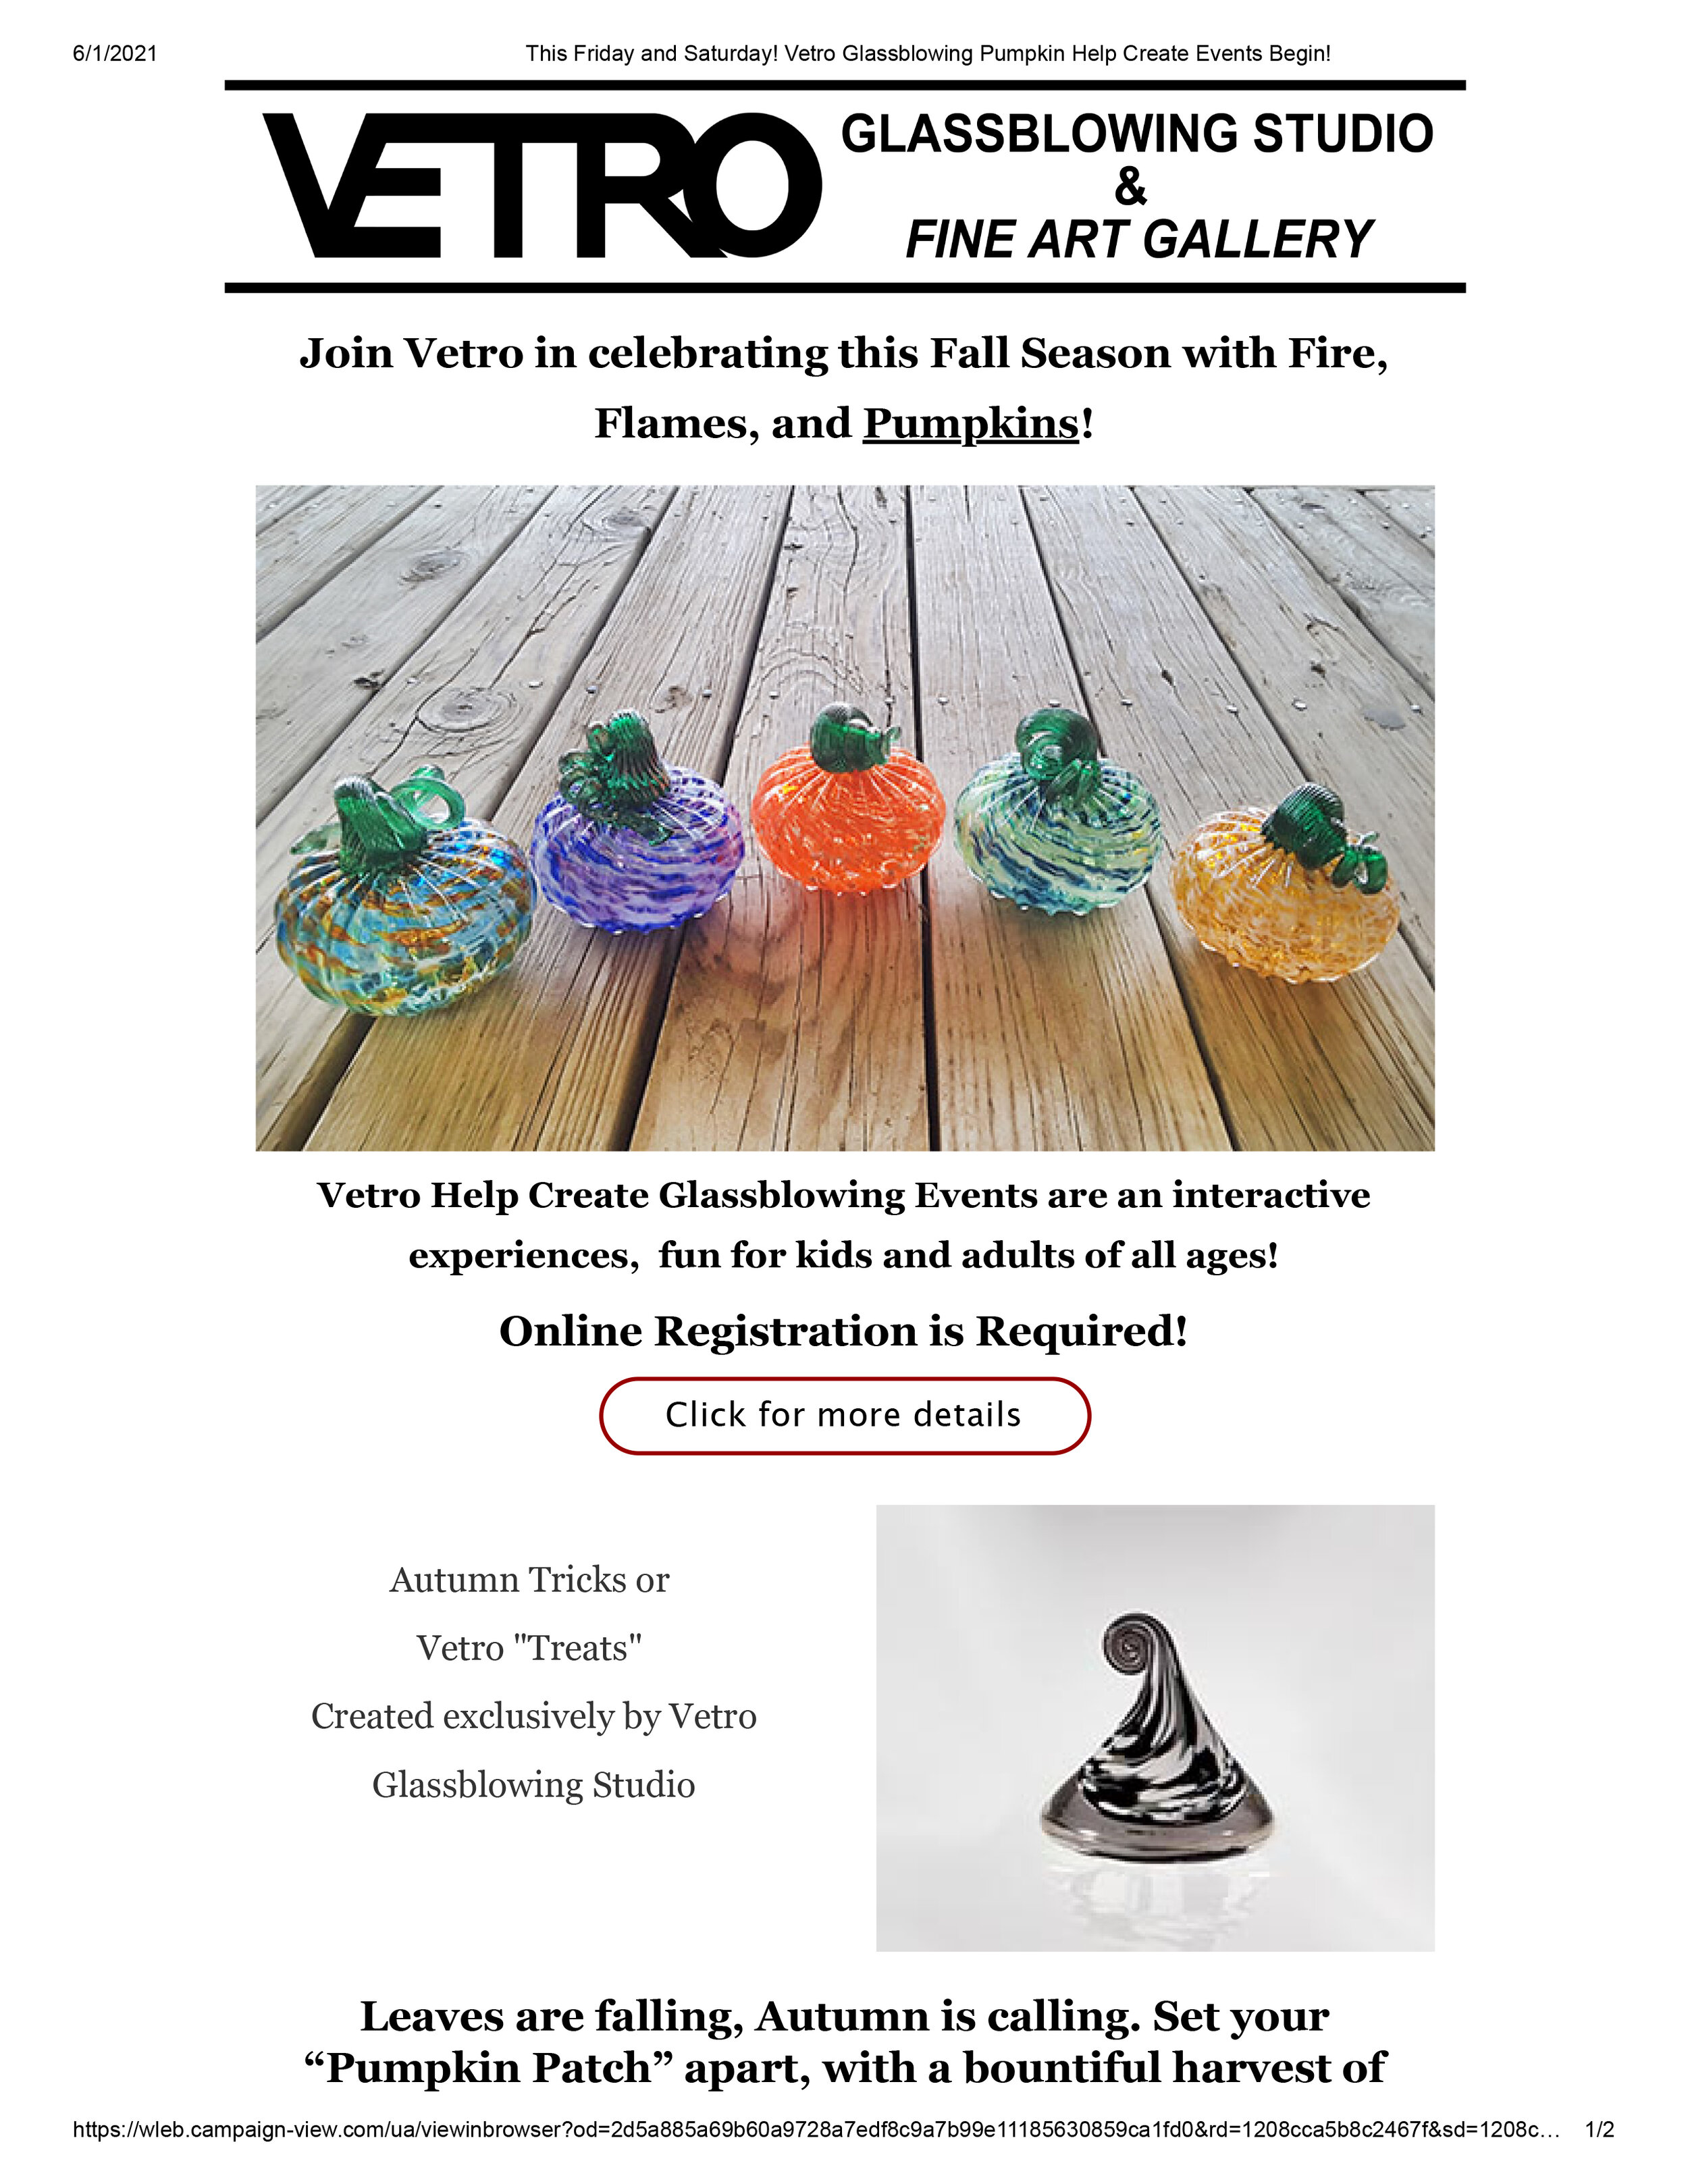 Email Campaigns -Vetro Glassblowing Studio - celebrating this Fall Season with Fire-1.jpg